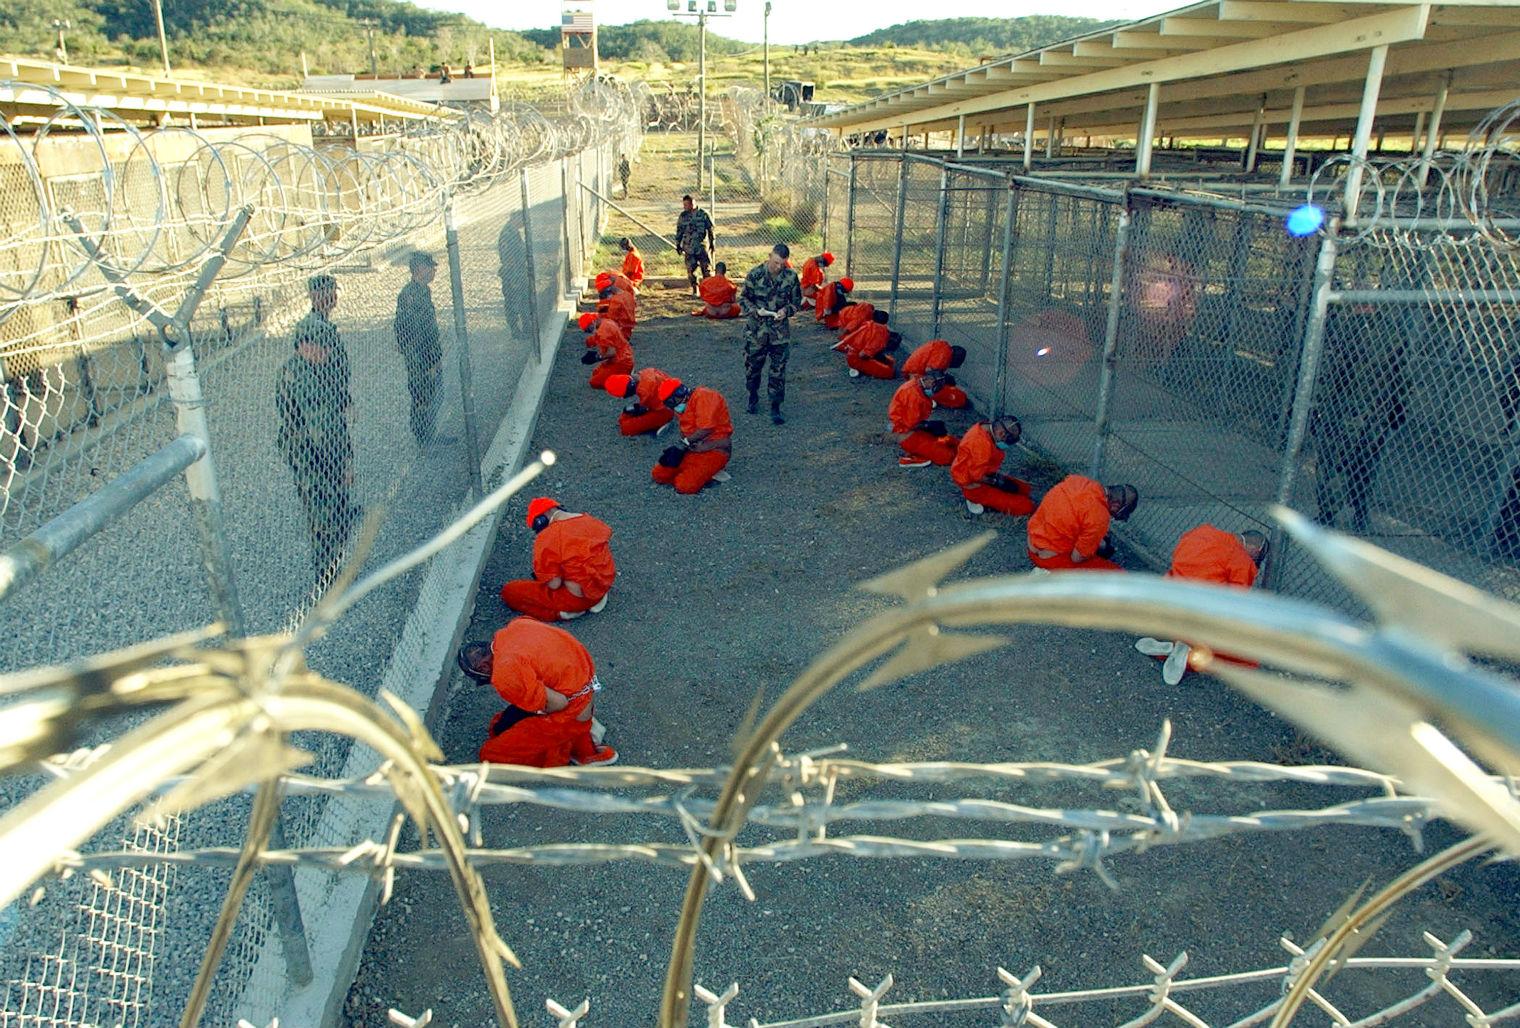 Barack Obama has proved unable to fulfil his promise to close Guantanamo Bay